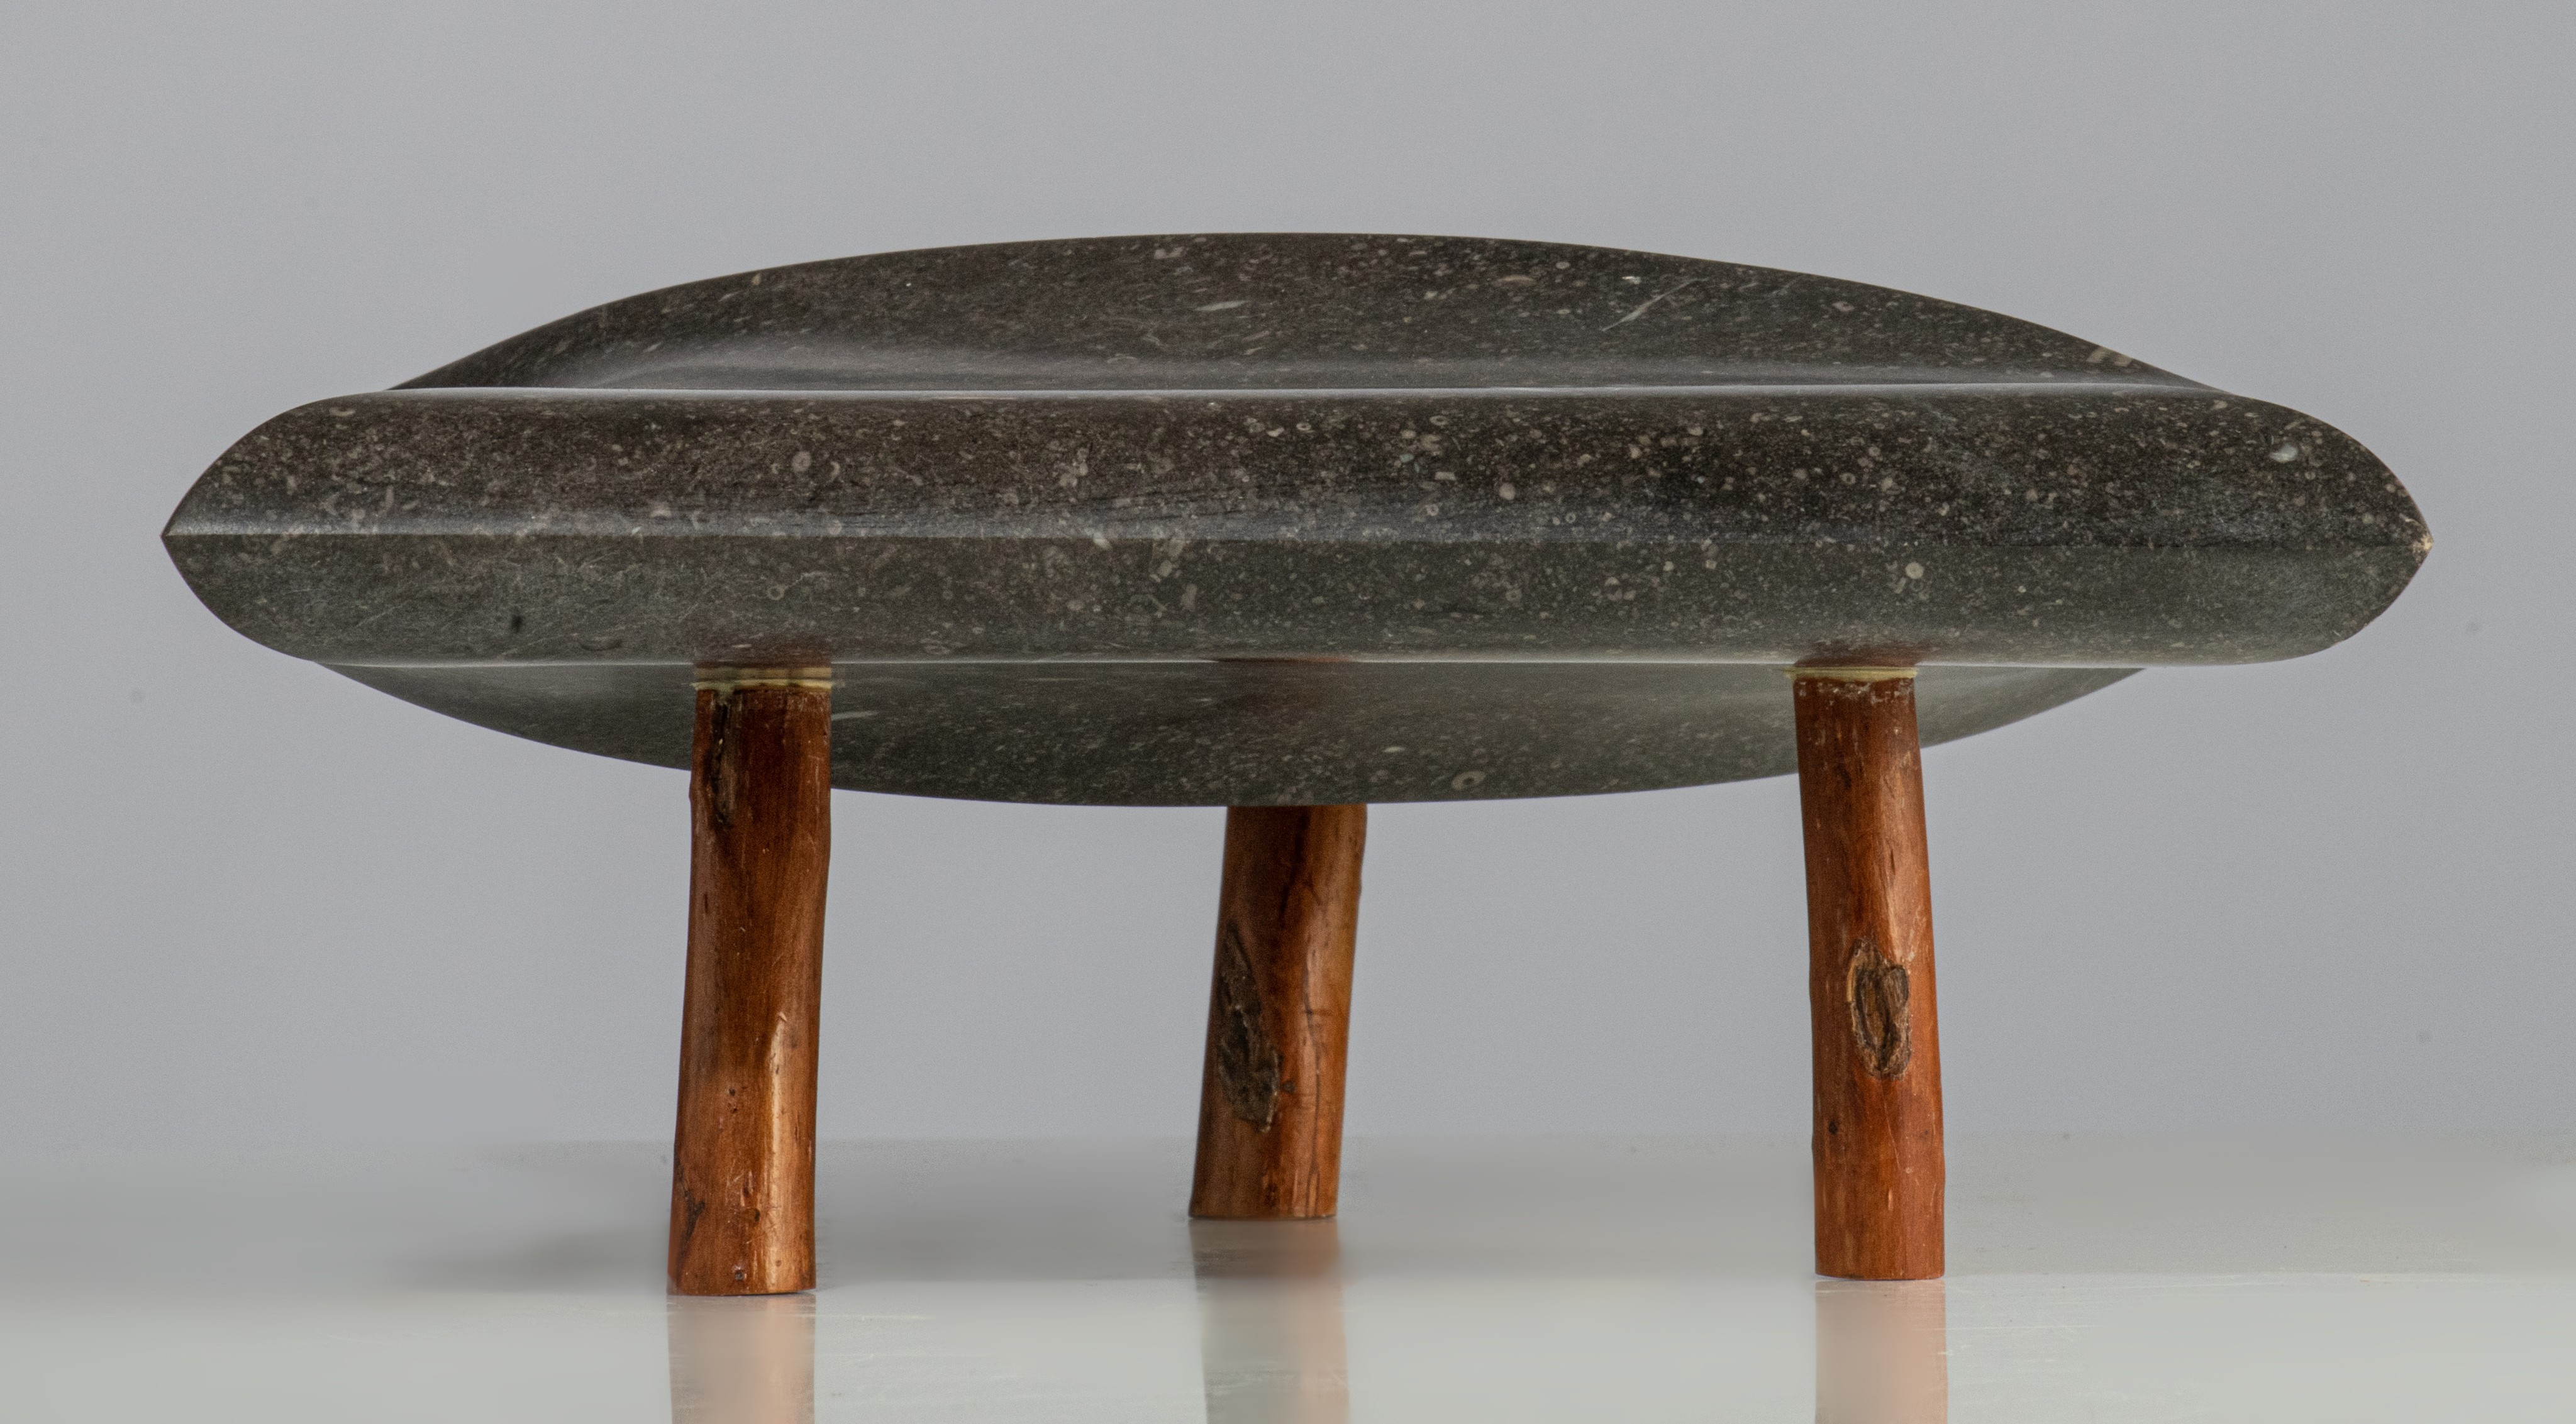 Bo Alisson (1952), untitled sculpture, Belgian blue stone on wooden stands, H 14 - W 40 cm - Image 5 of 7